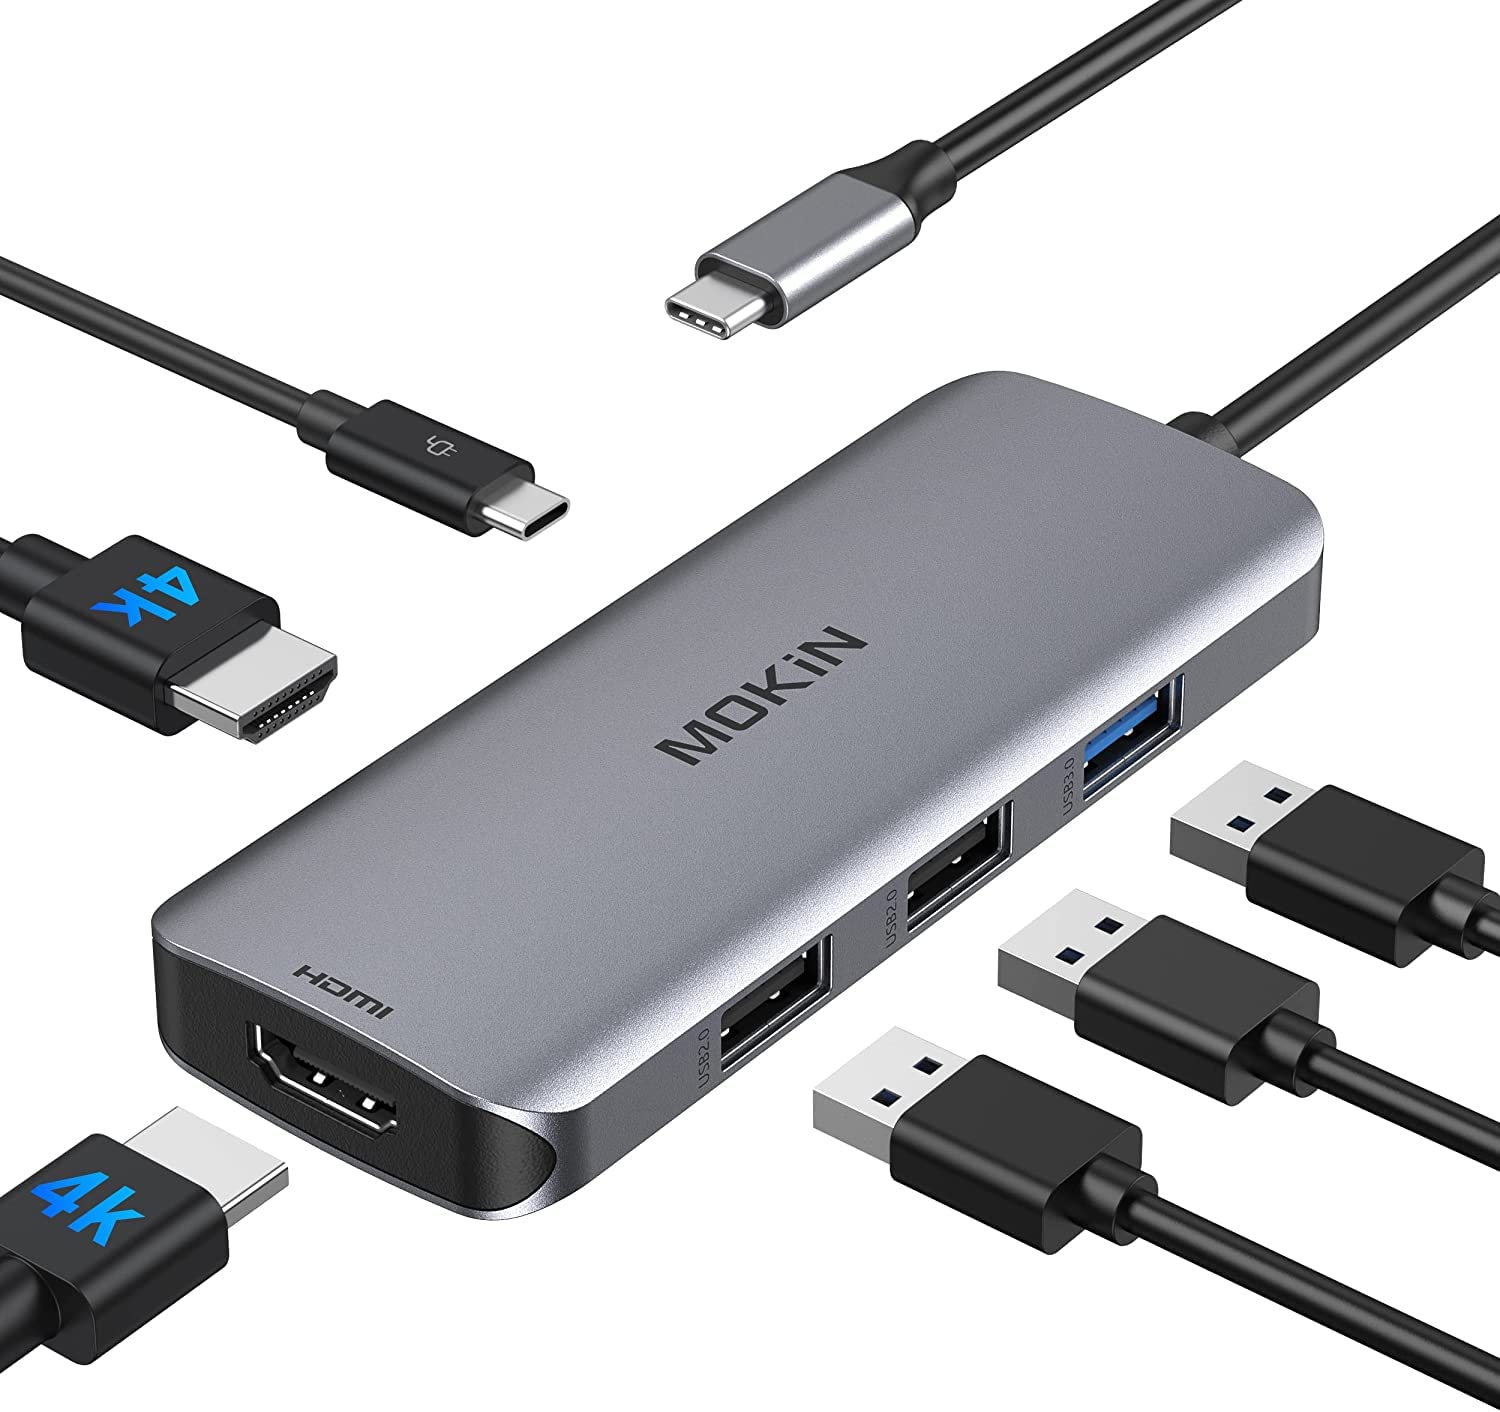 USB-C and HDMI ports being connected